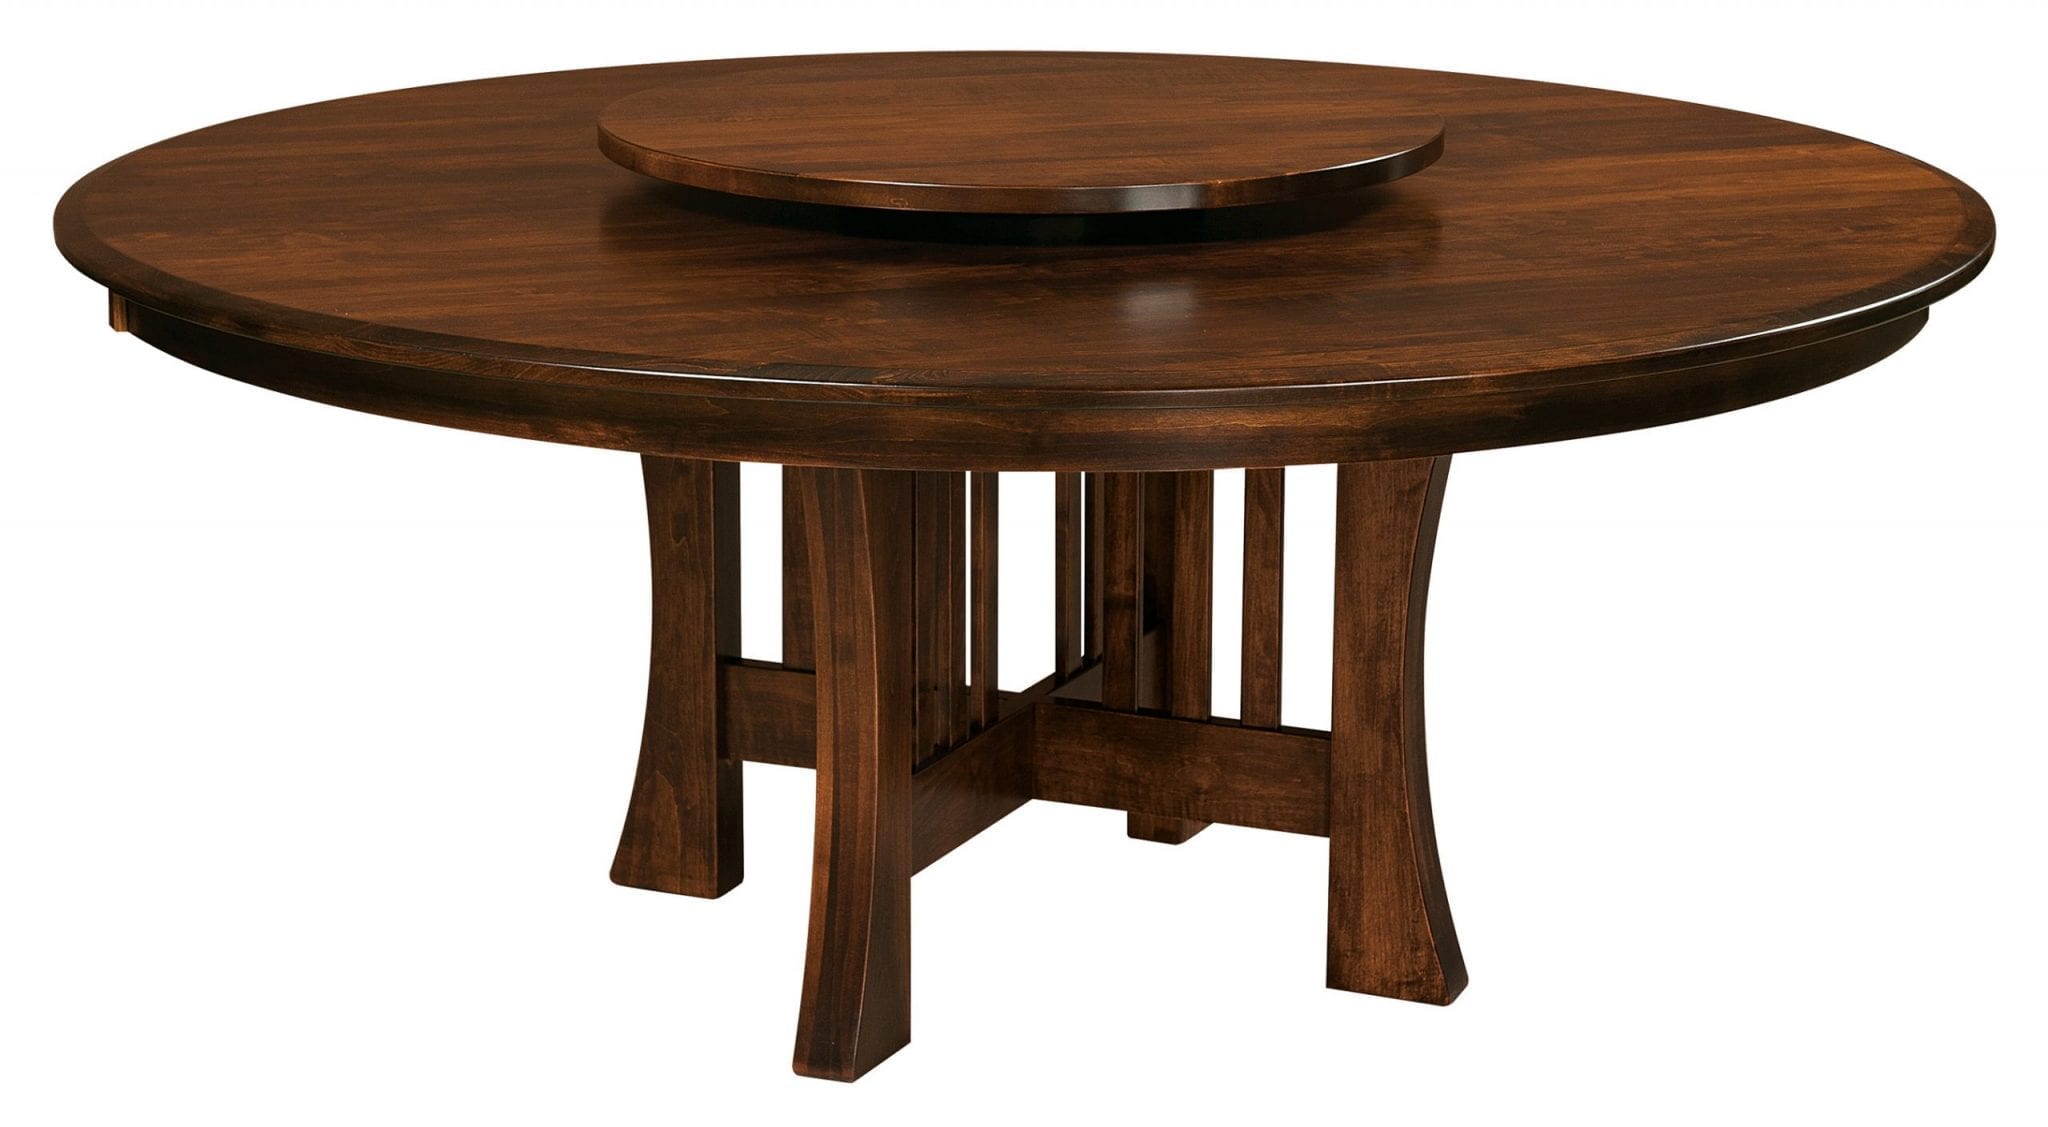 Solid wood Amish style card table